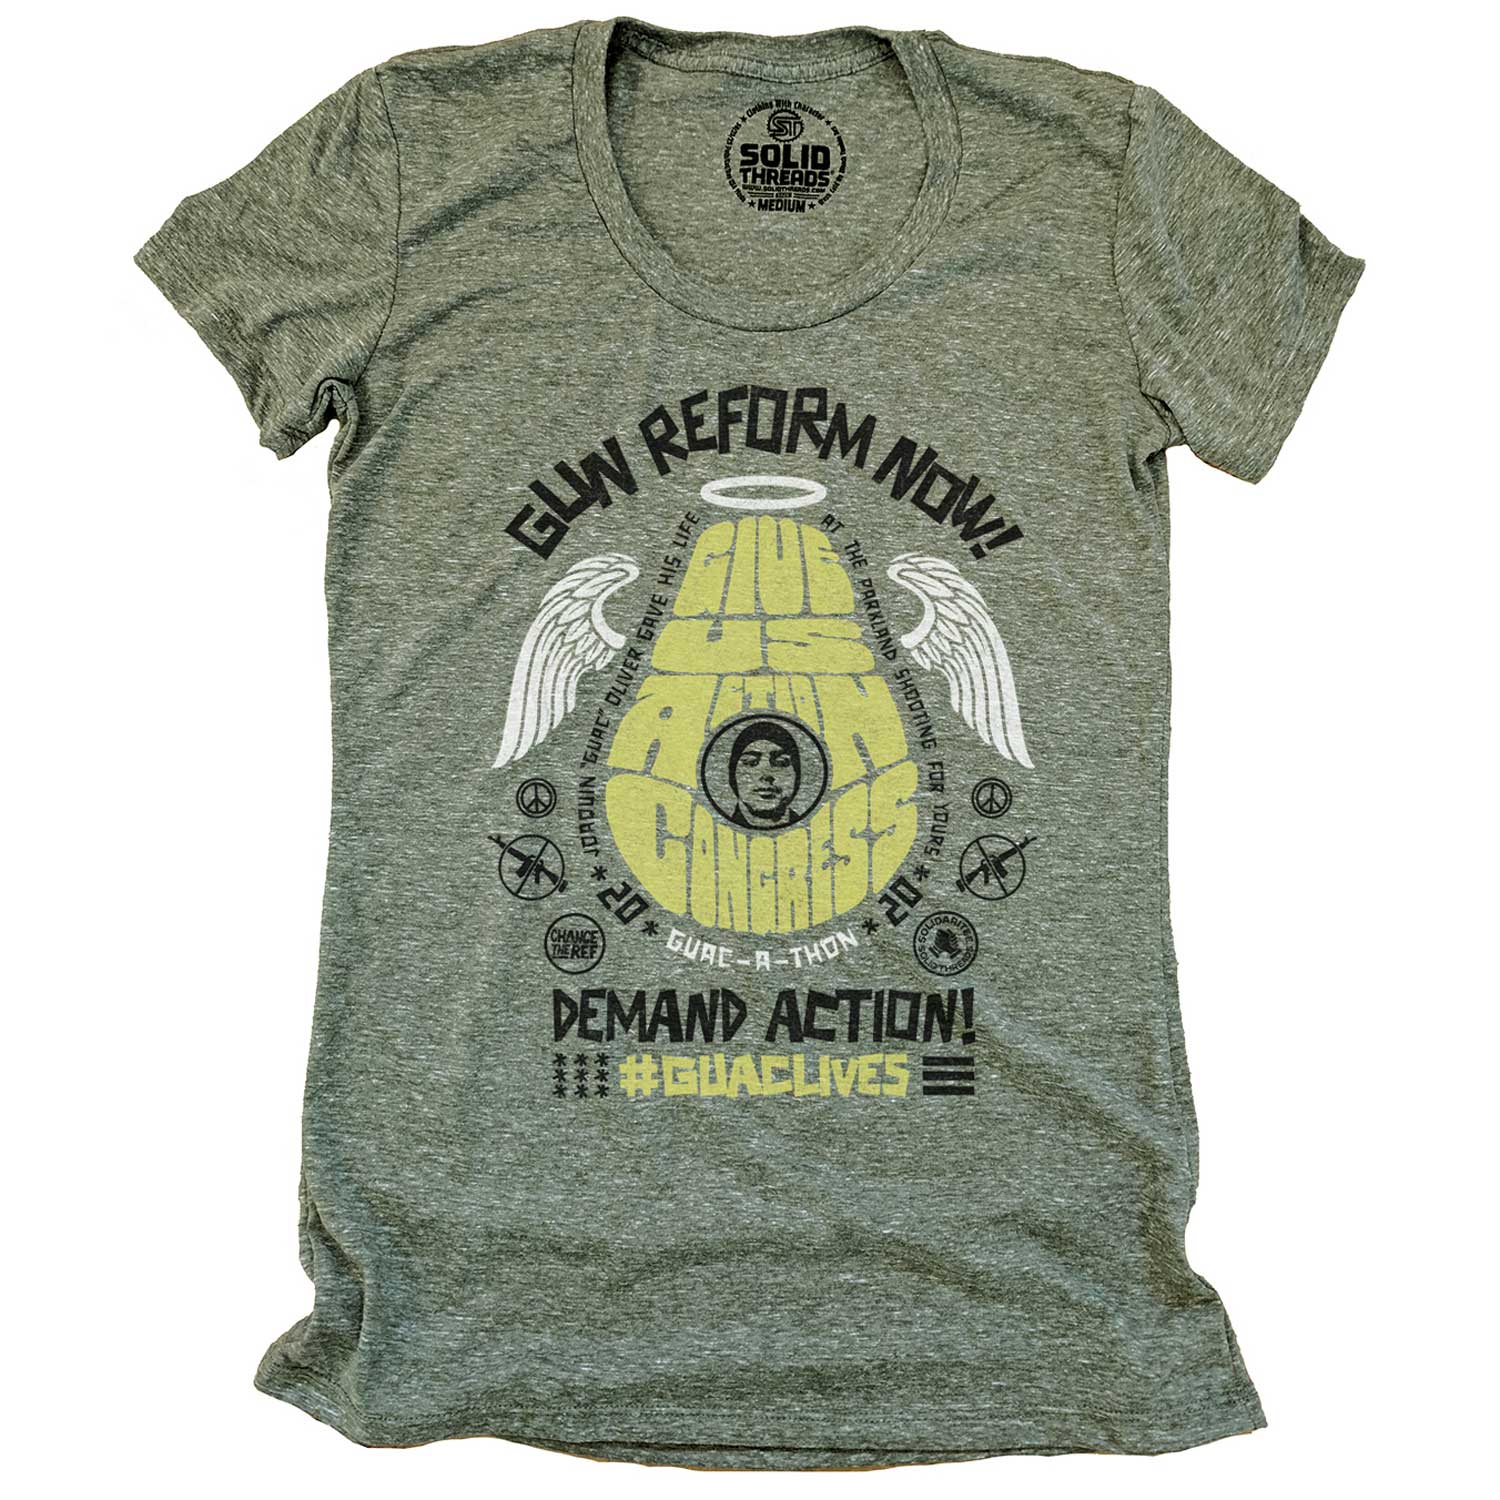 Women's Guac live give us action congress vintage inspired gun reform tee shirt with cool retro protest graphic | #GUAClives in SolidariTEE with Change The Ref